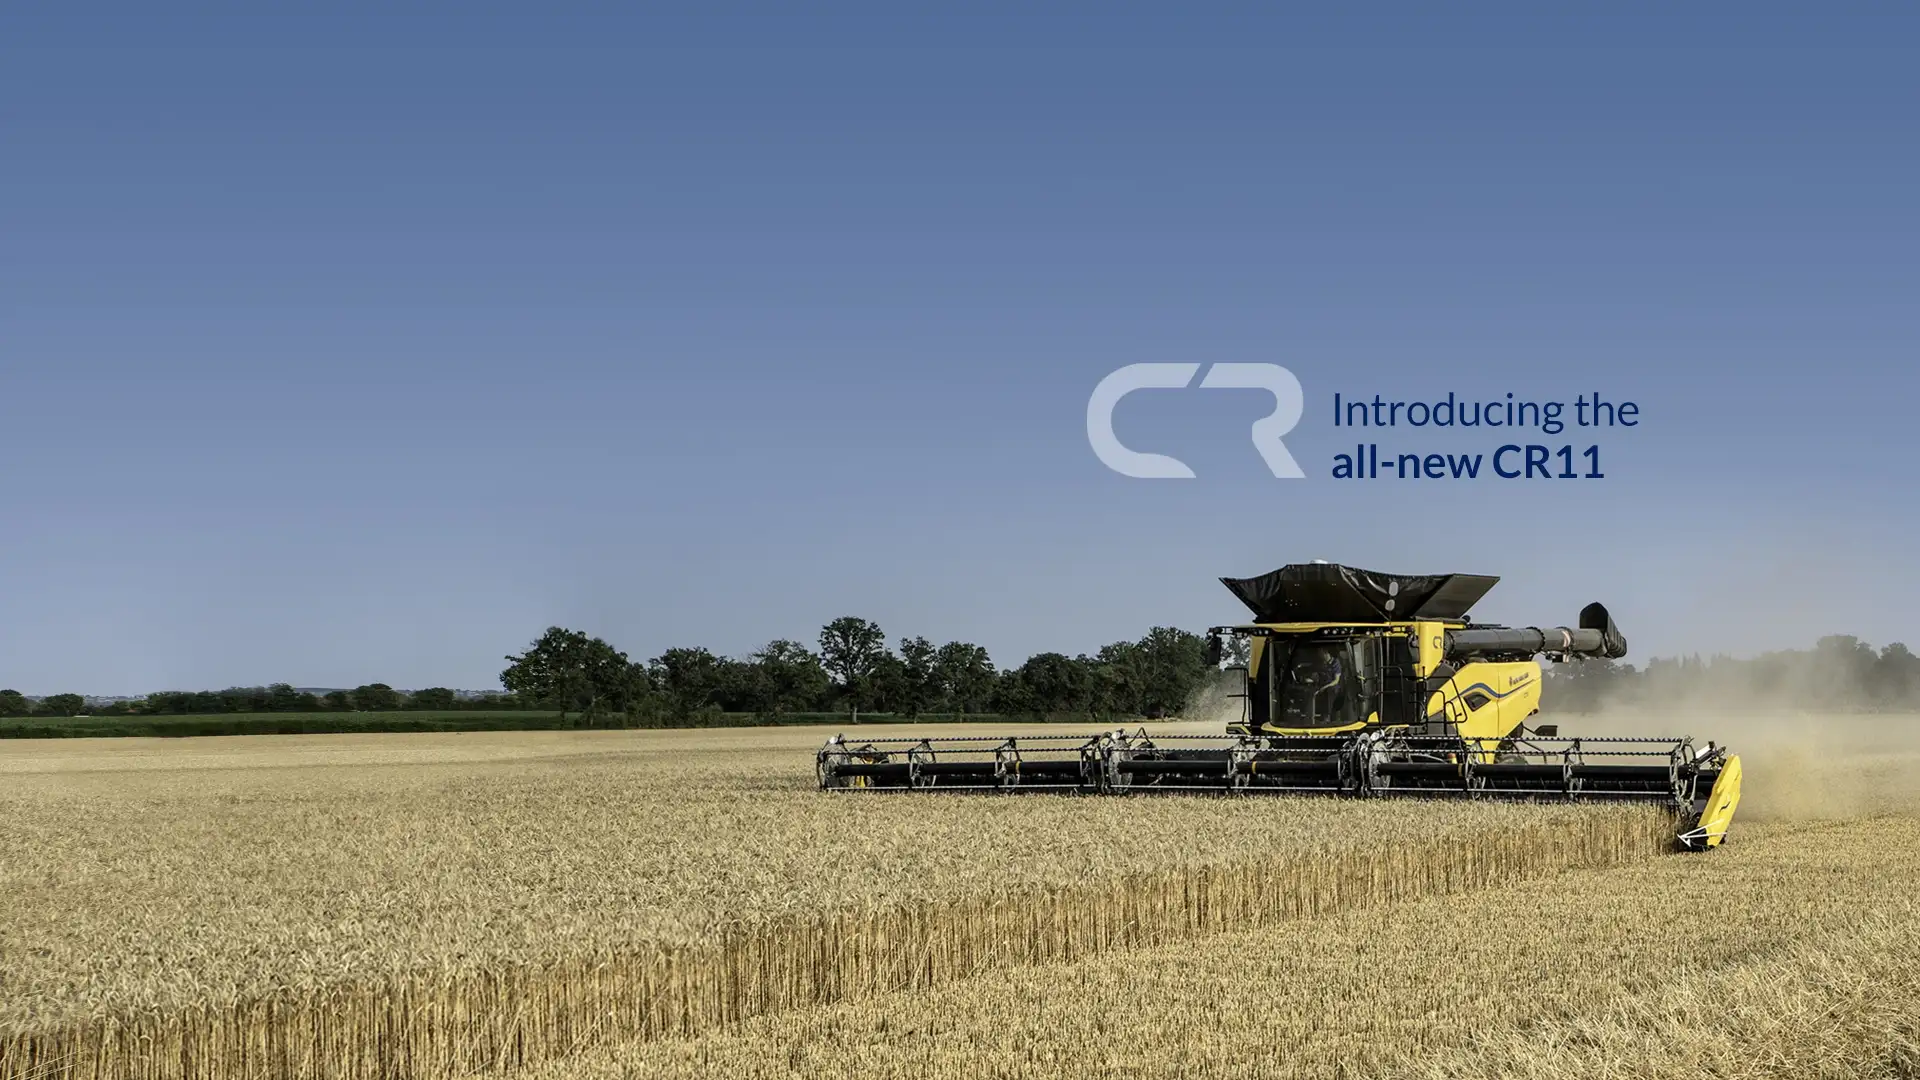 Introducing the all-new CR11 Combine